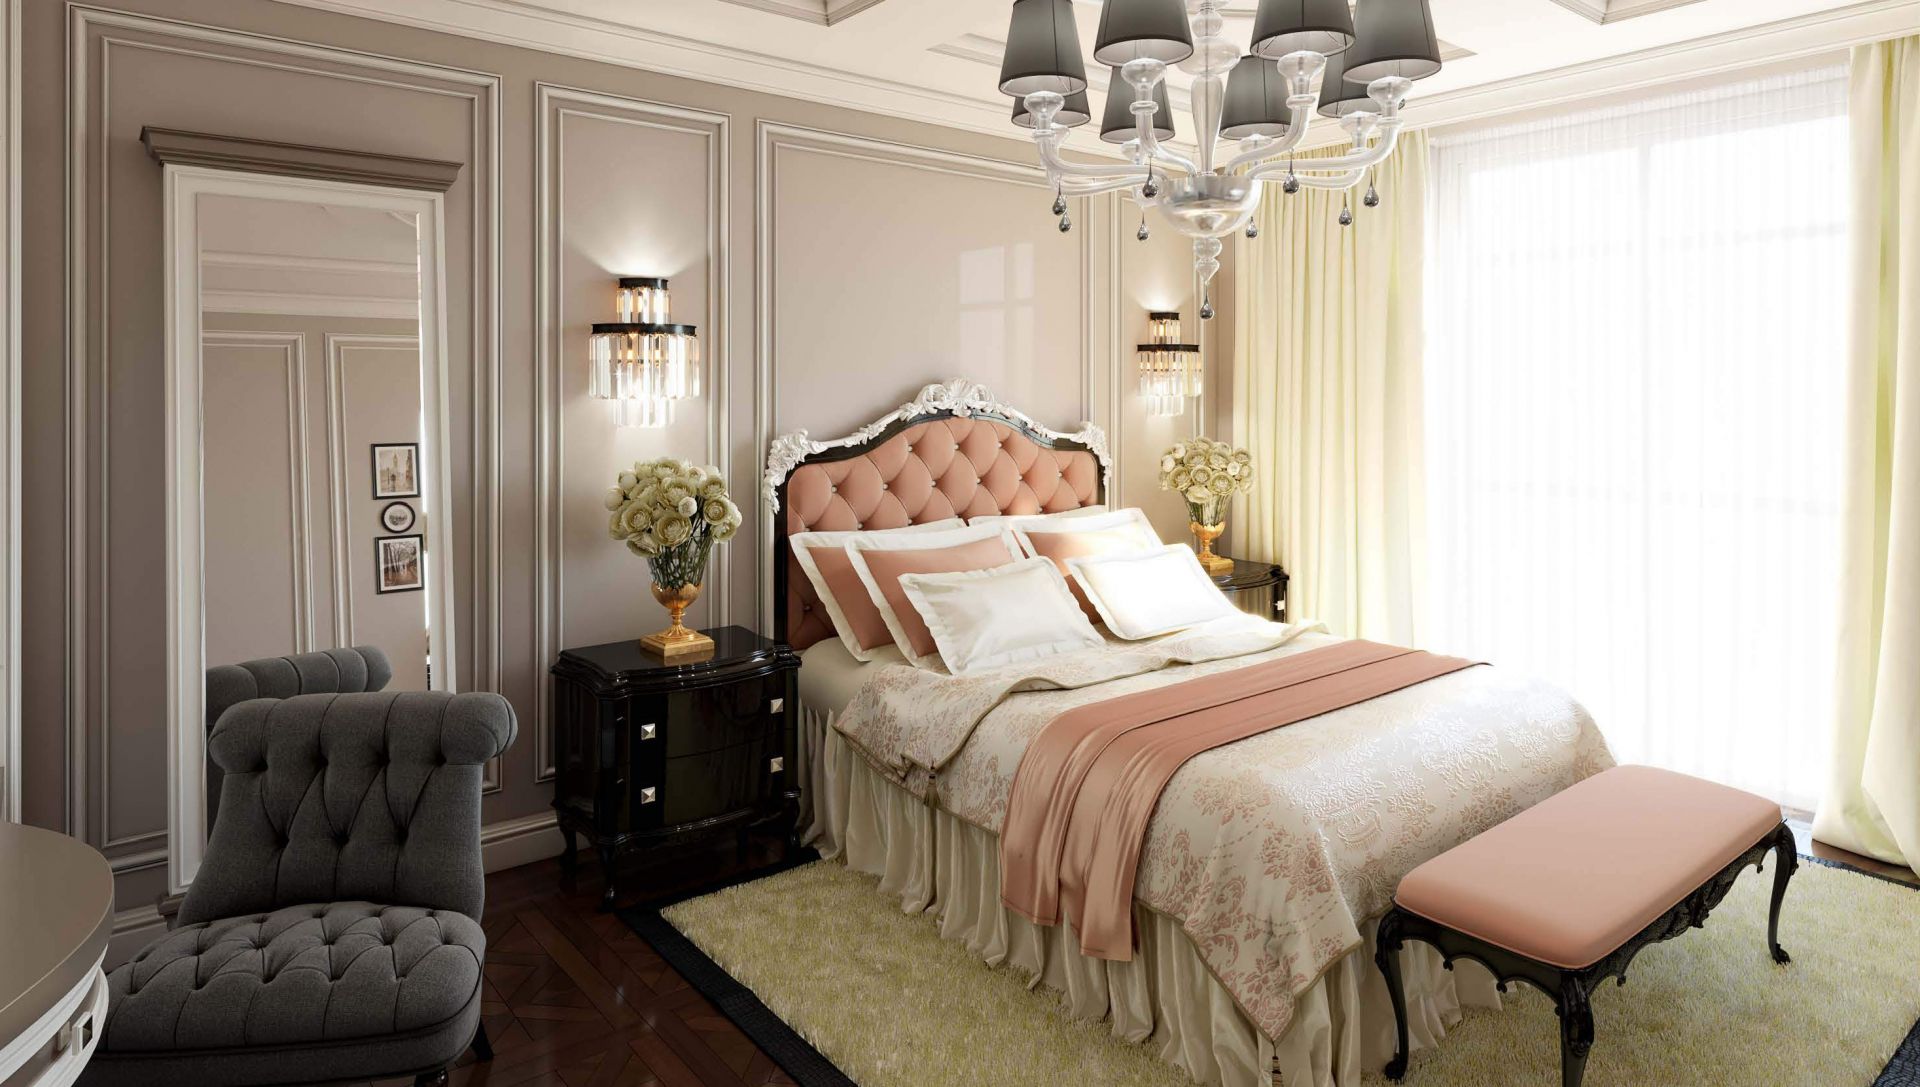 Neoclassical style bedroom design